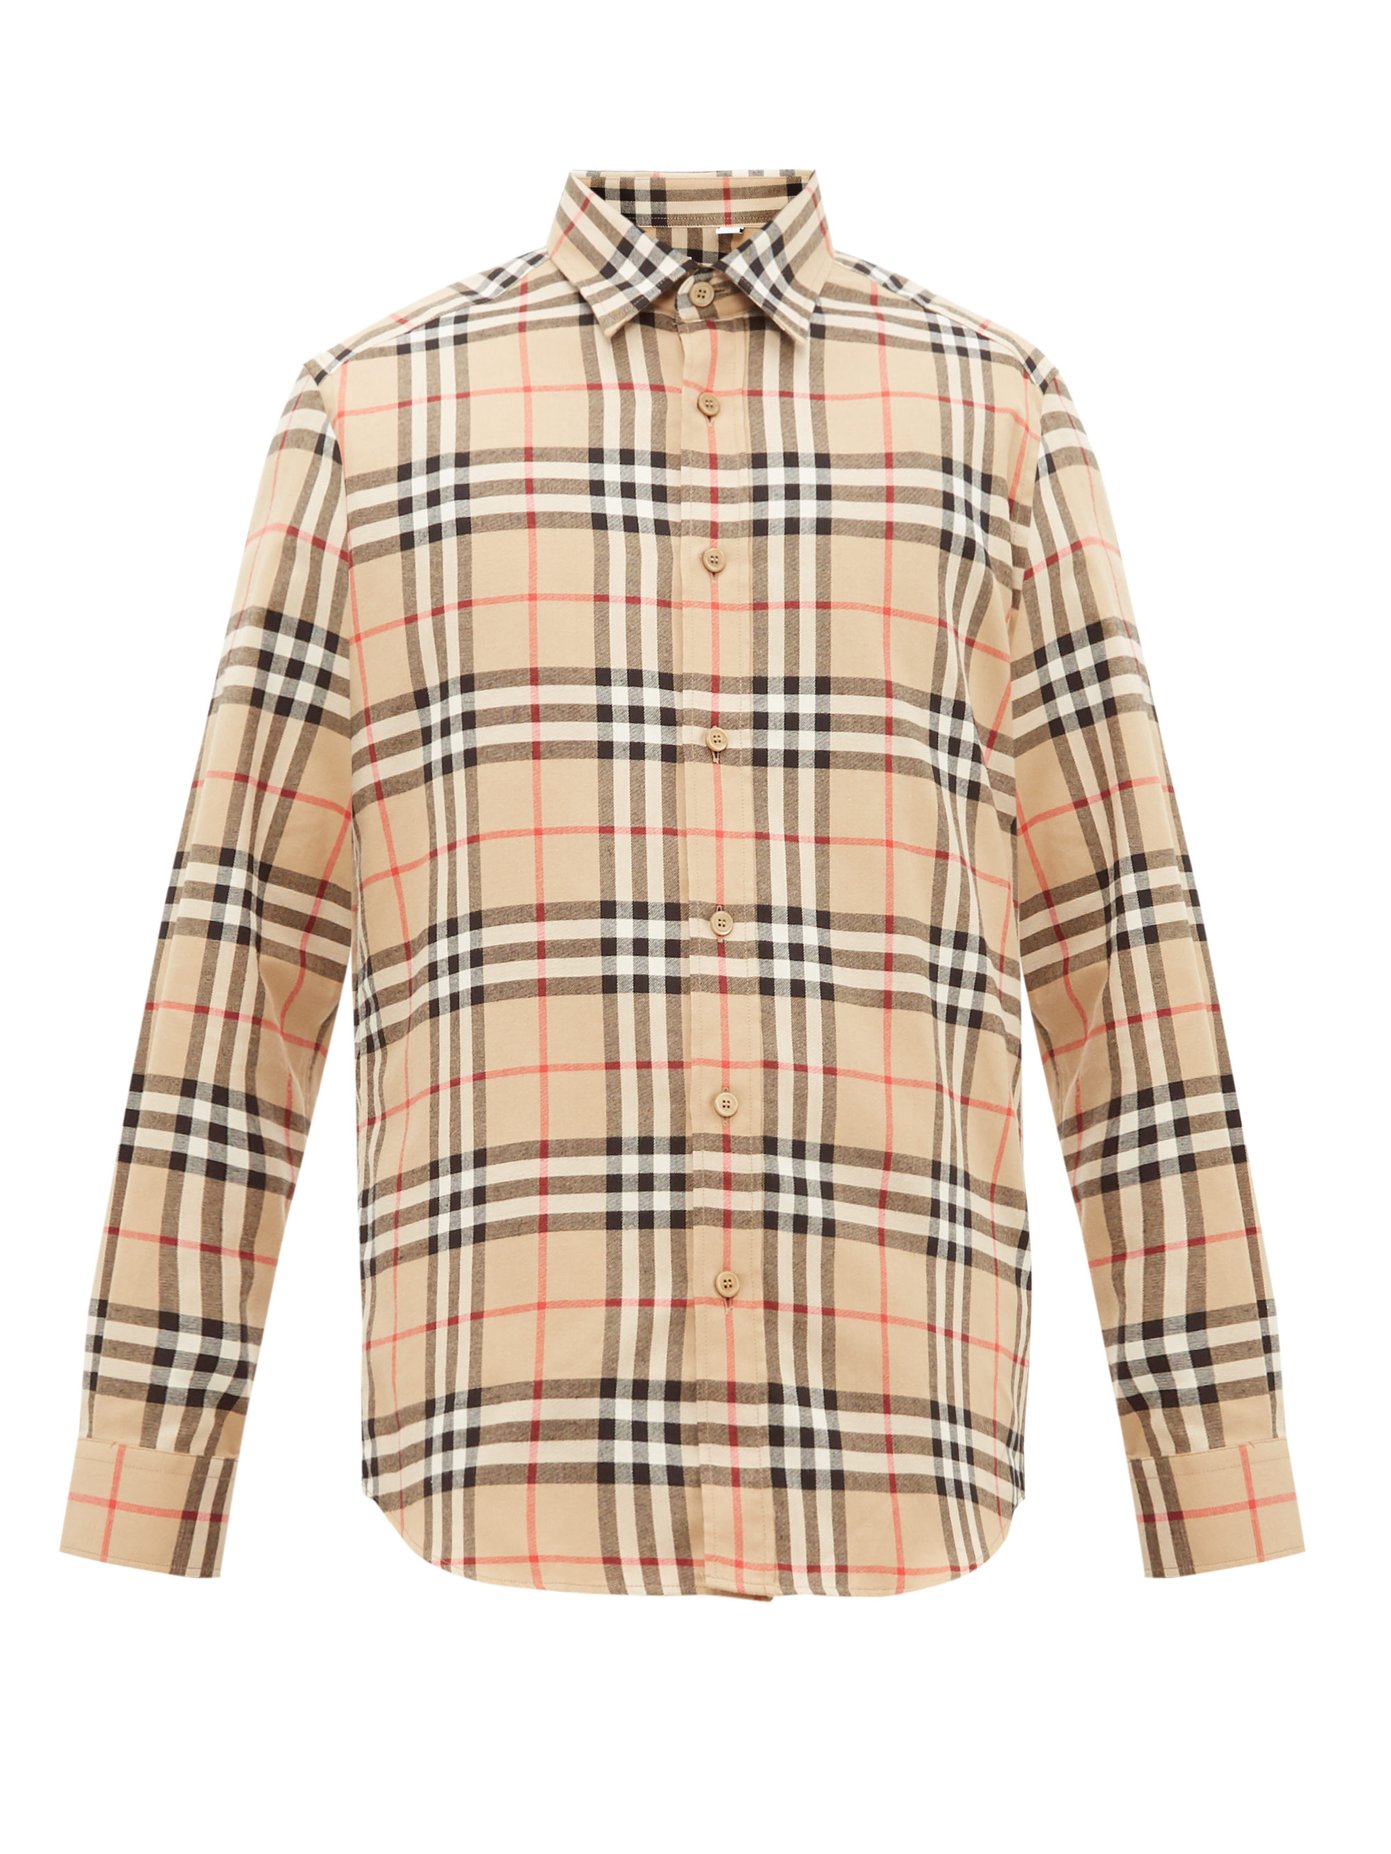 burberry flannel outfit